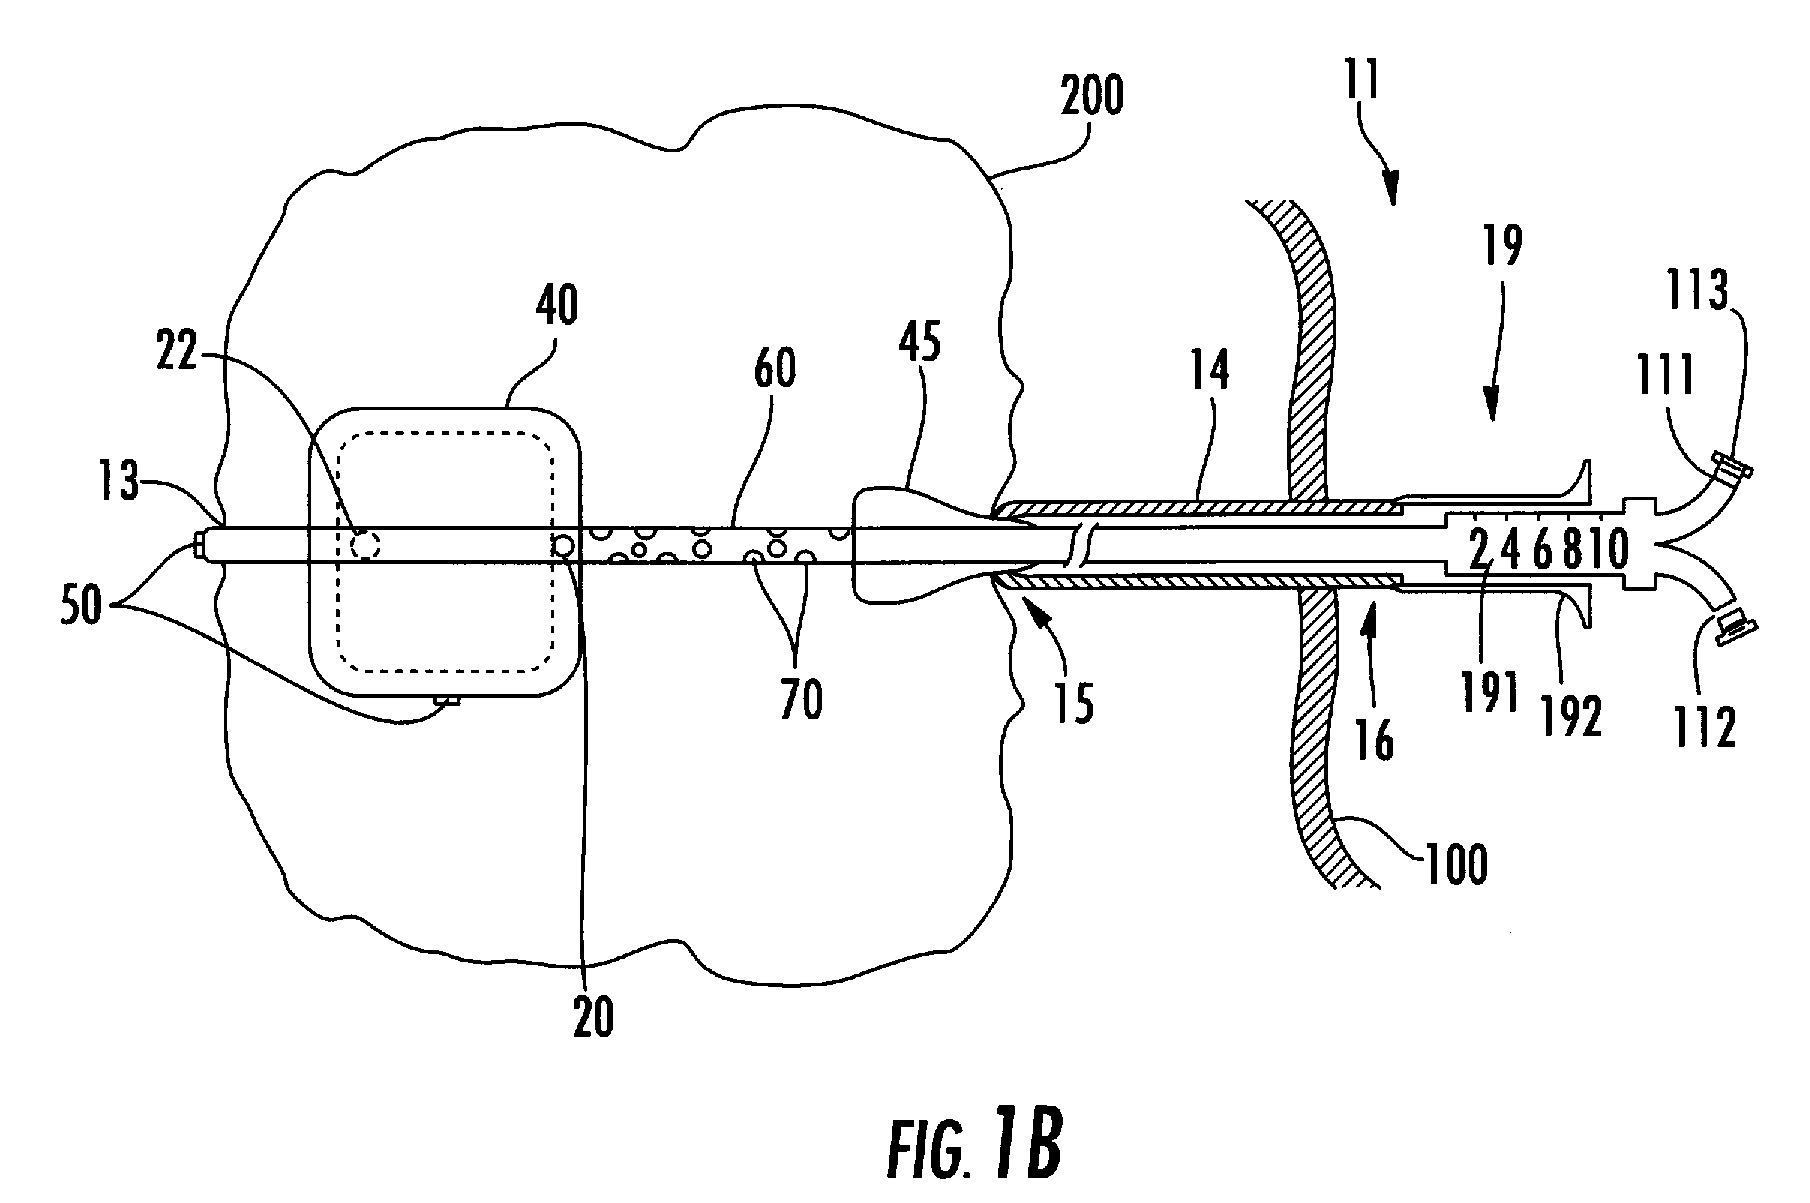 Process and device for selectively treating interstitial tissue